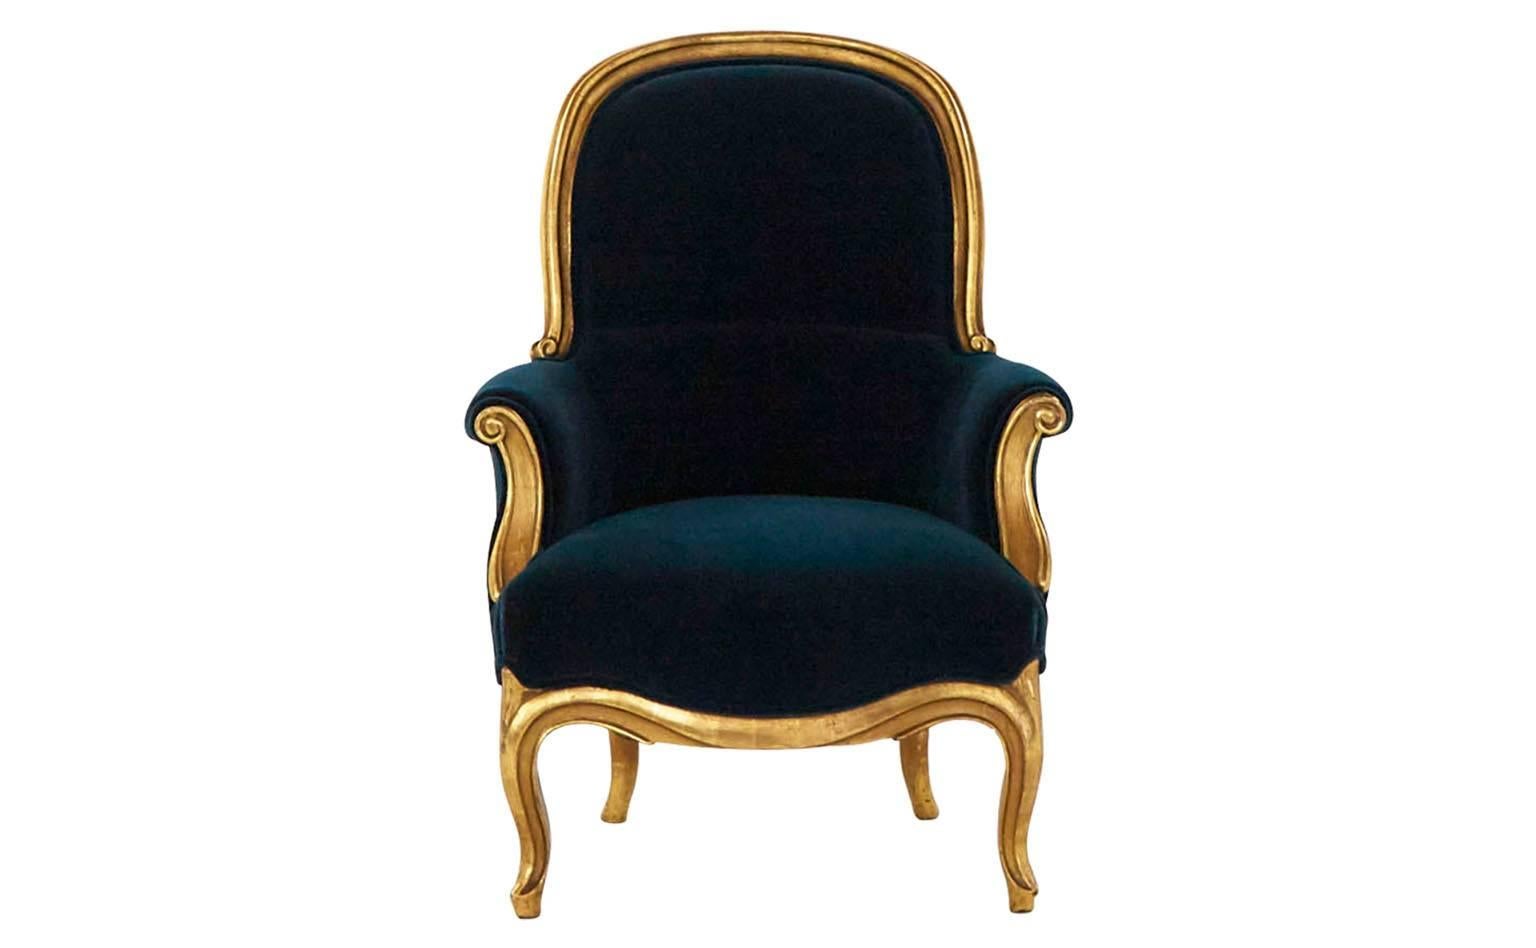 19th Century Antique French Gilt Armchair